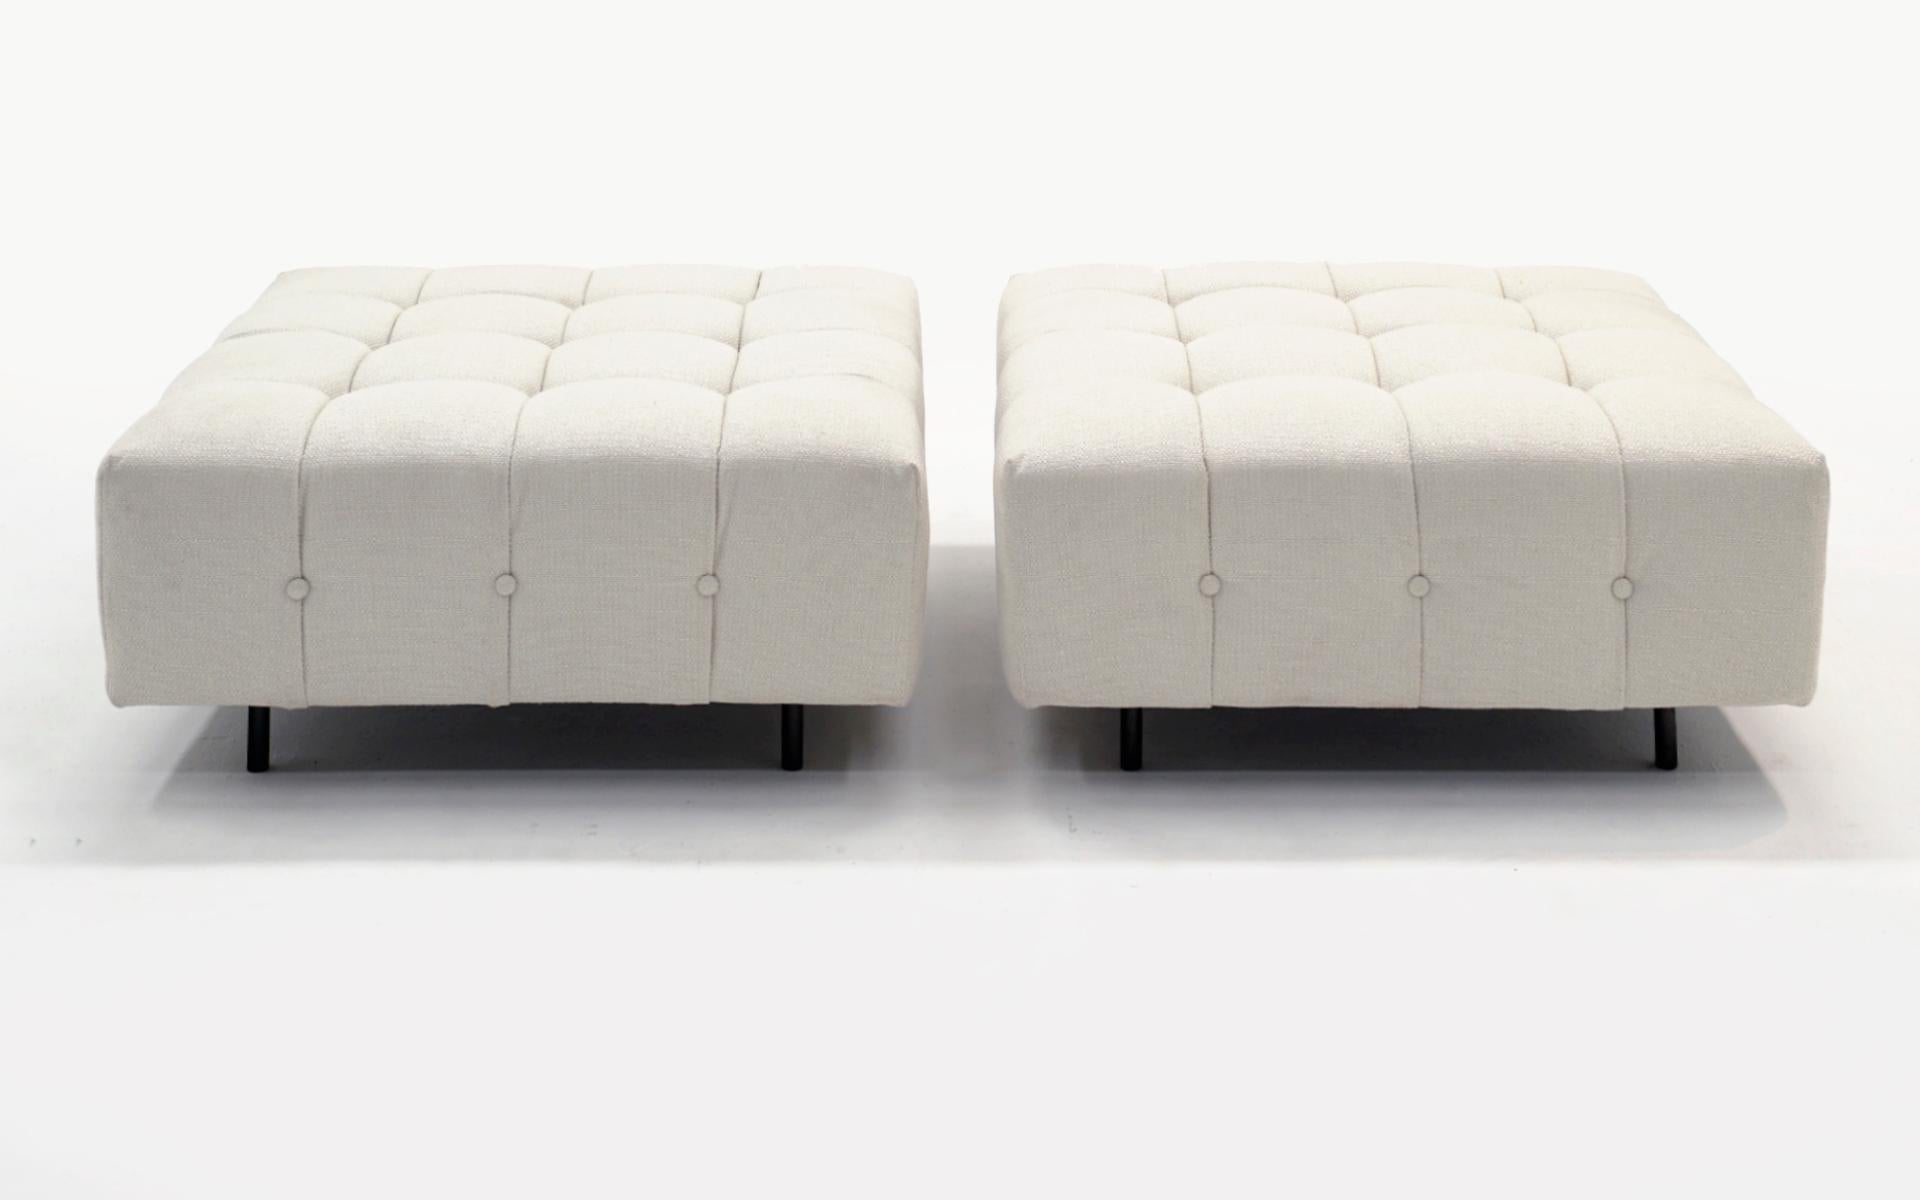 Mid-Century Modern Pair of Ottomans by Harvey Probber, New White Upholstery, Signed, Ready to Use For Sale